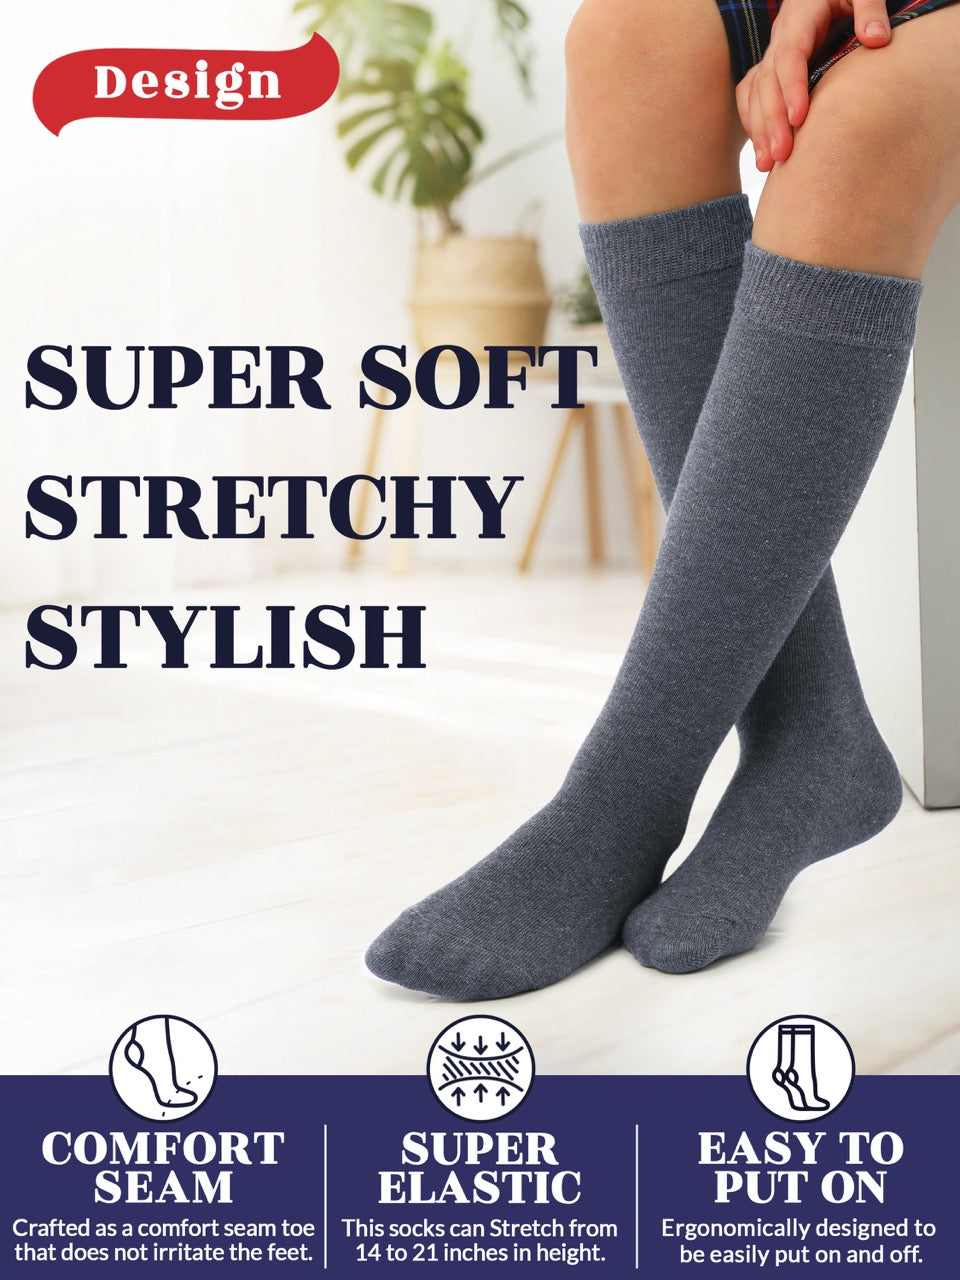 Experience the ultimate comfort and style with Hugh Ugoli Kids Bamboo School Socks. These grey socks perfect for school or everyday wear, our high-quality knee-high socks meet uniform standards while reducing blisters and staying in place. Available in four sizes for children aged 3-14 years